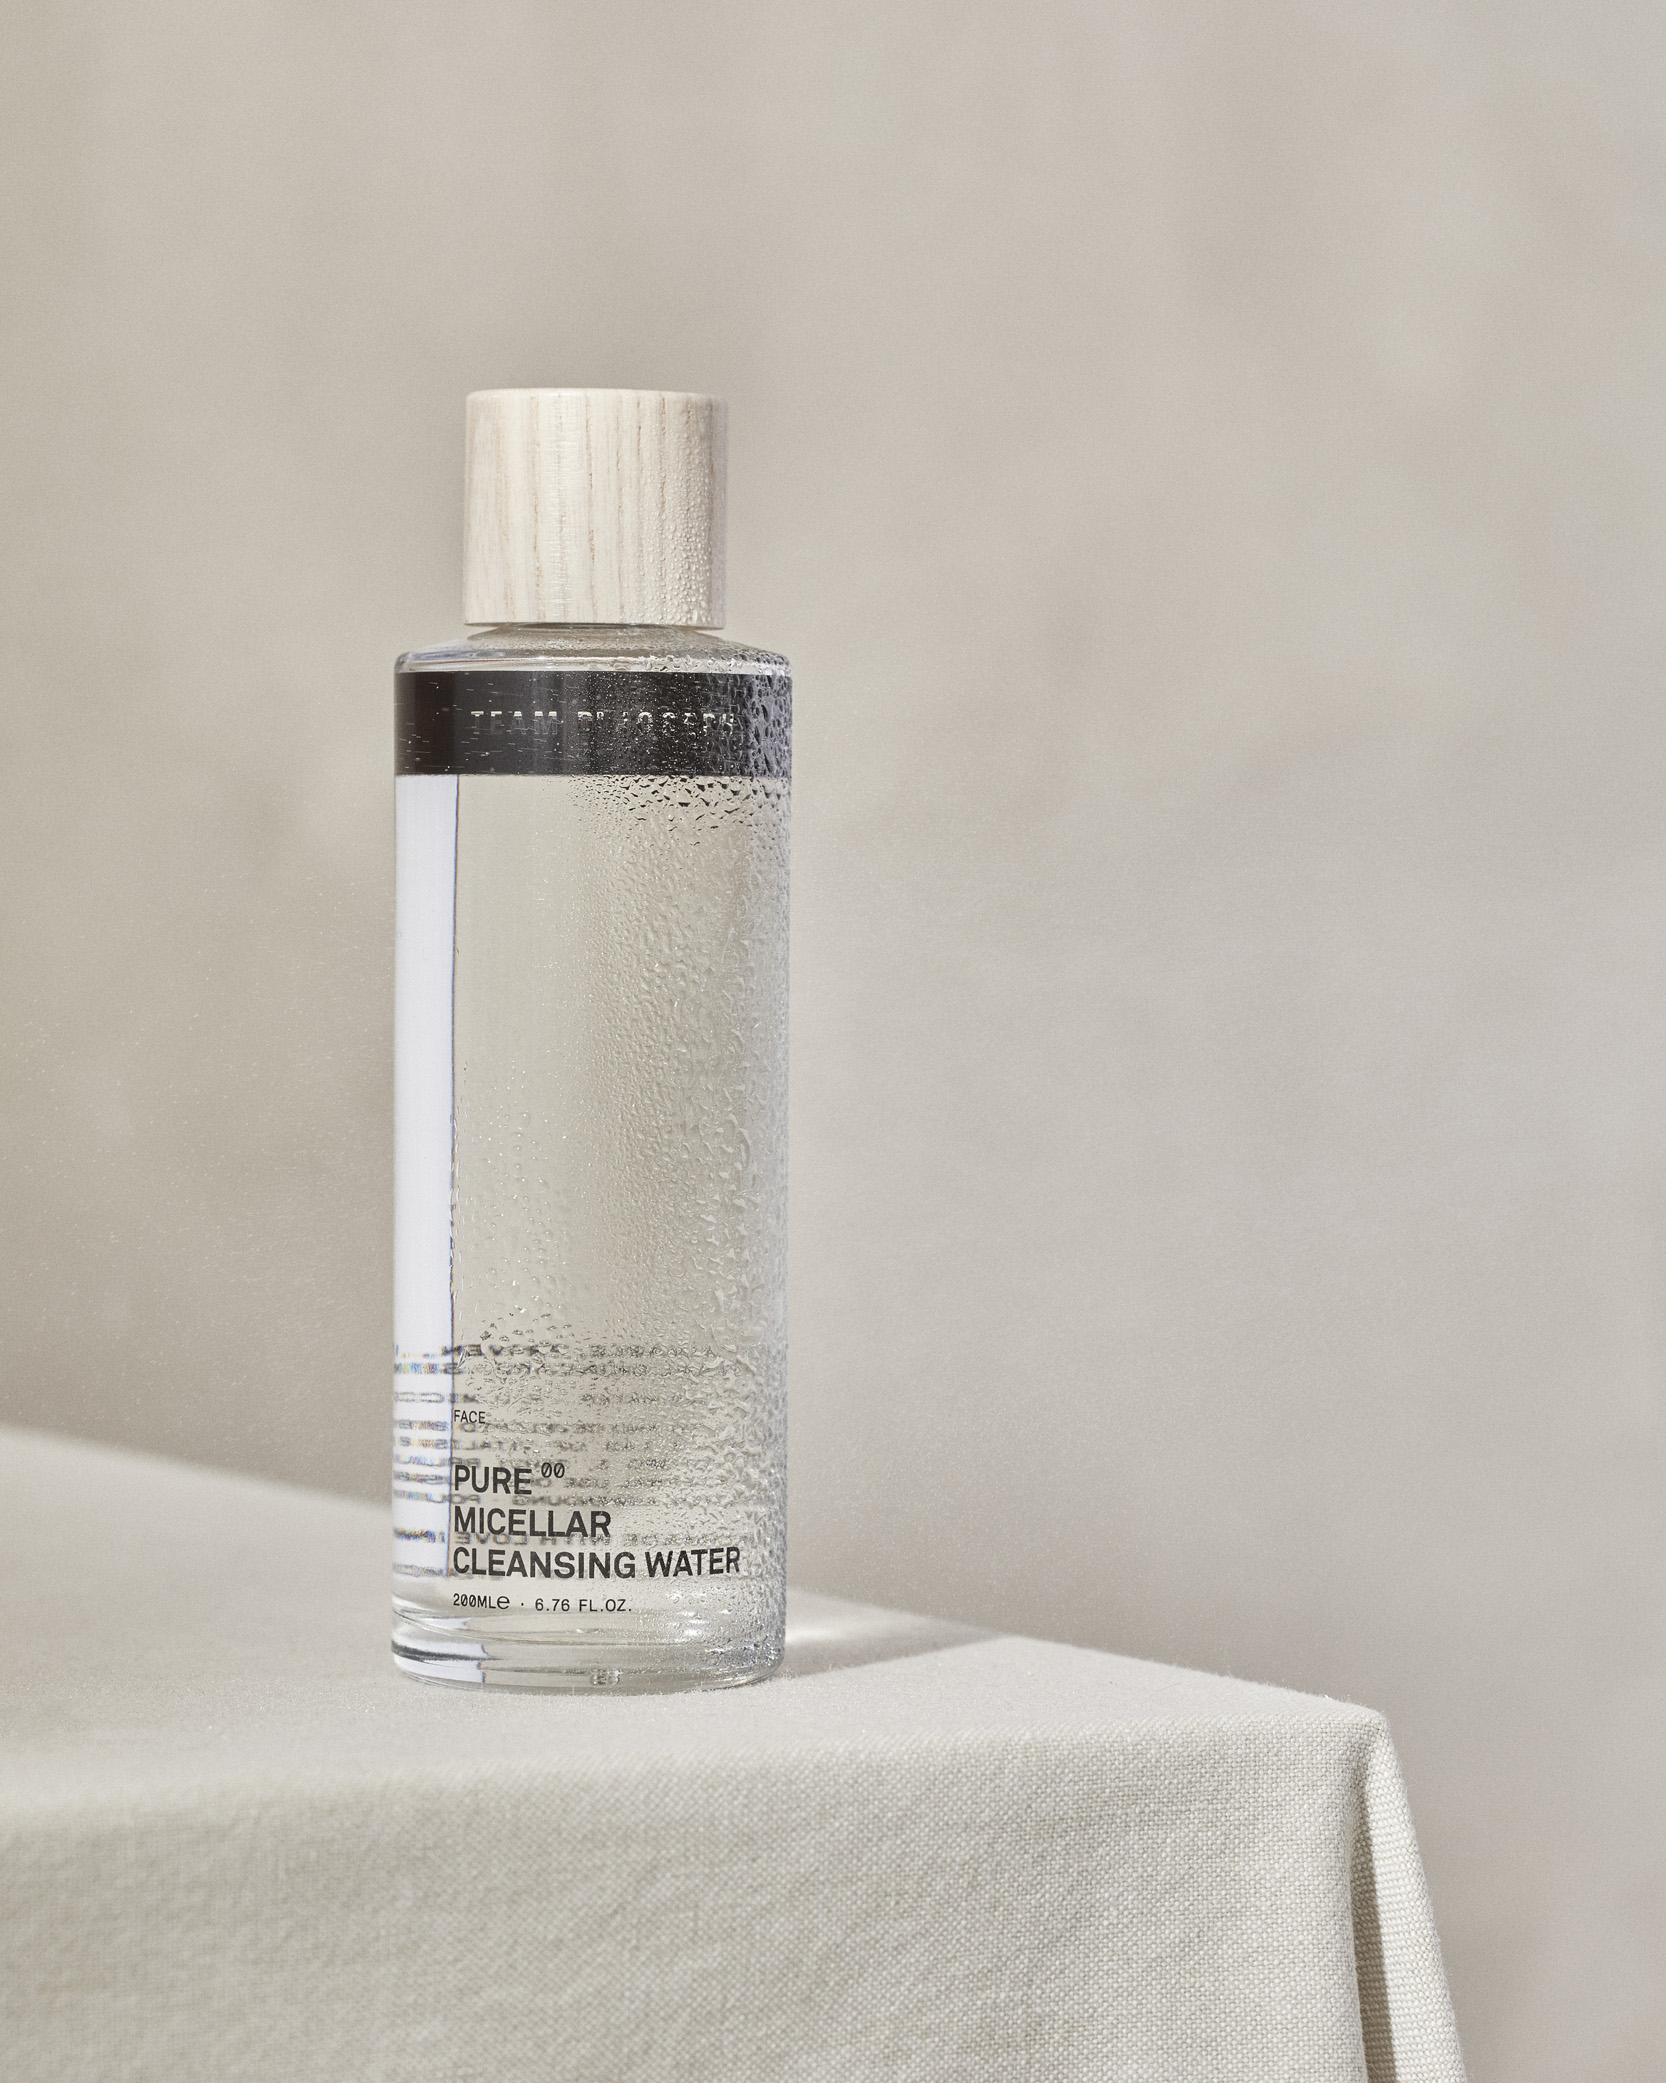 PURE MICELLAR CLEANSING WATER 200 ml